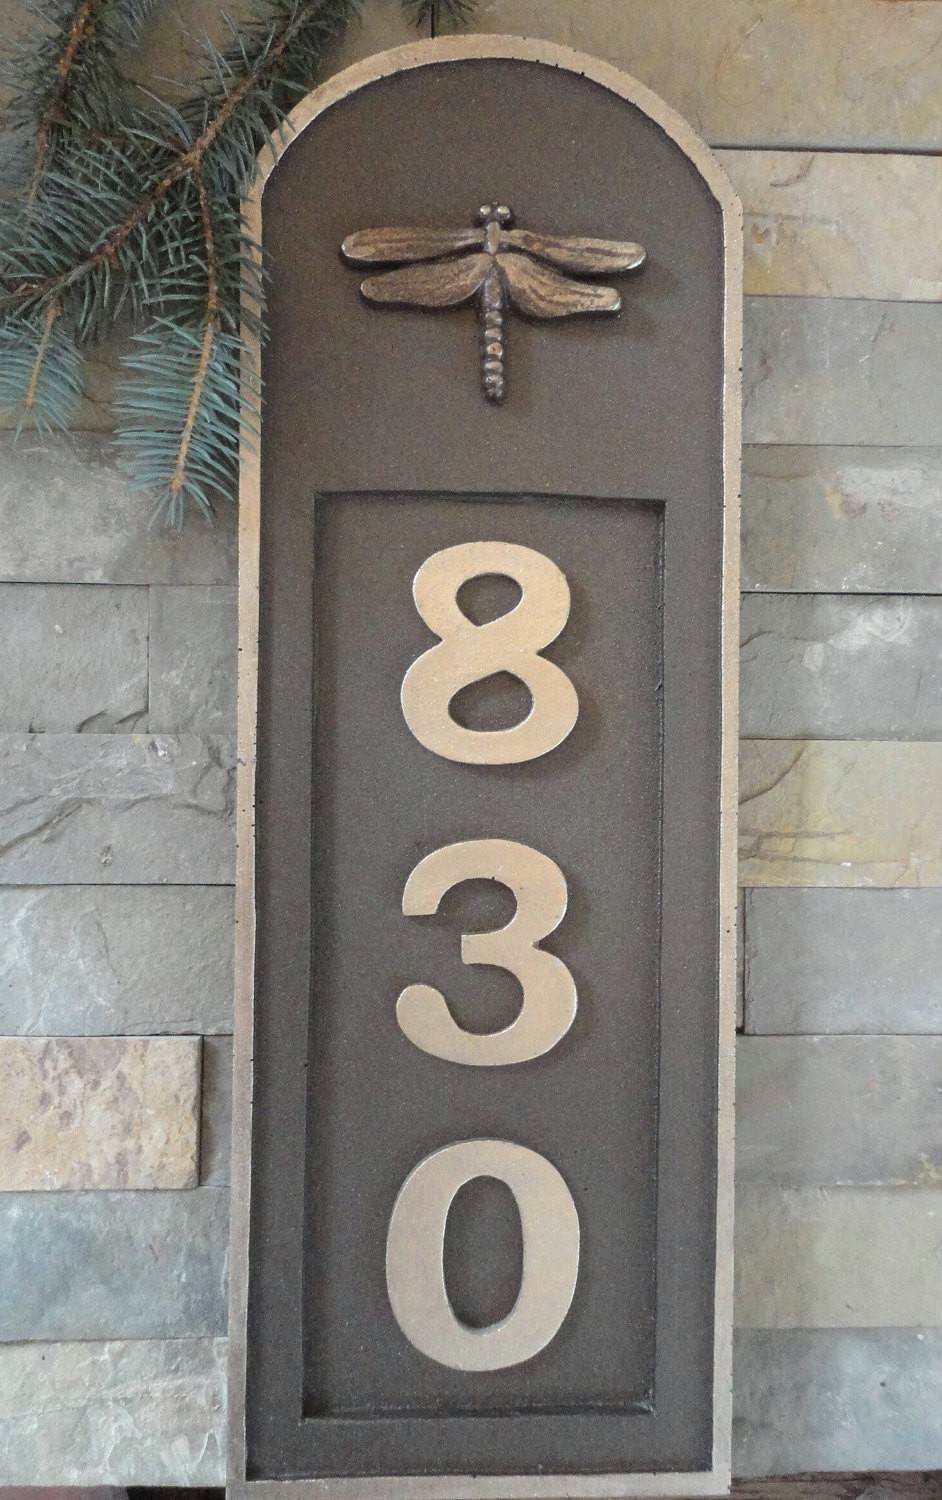 Dragonfly craftsman house numbers